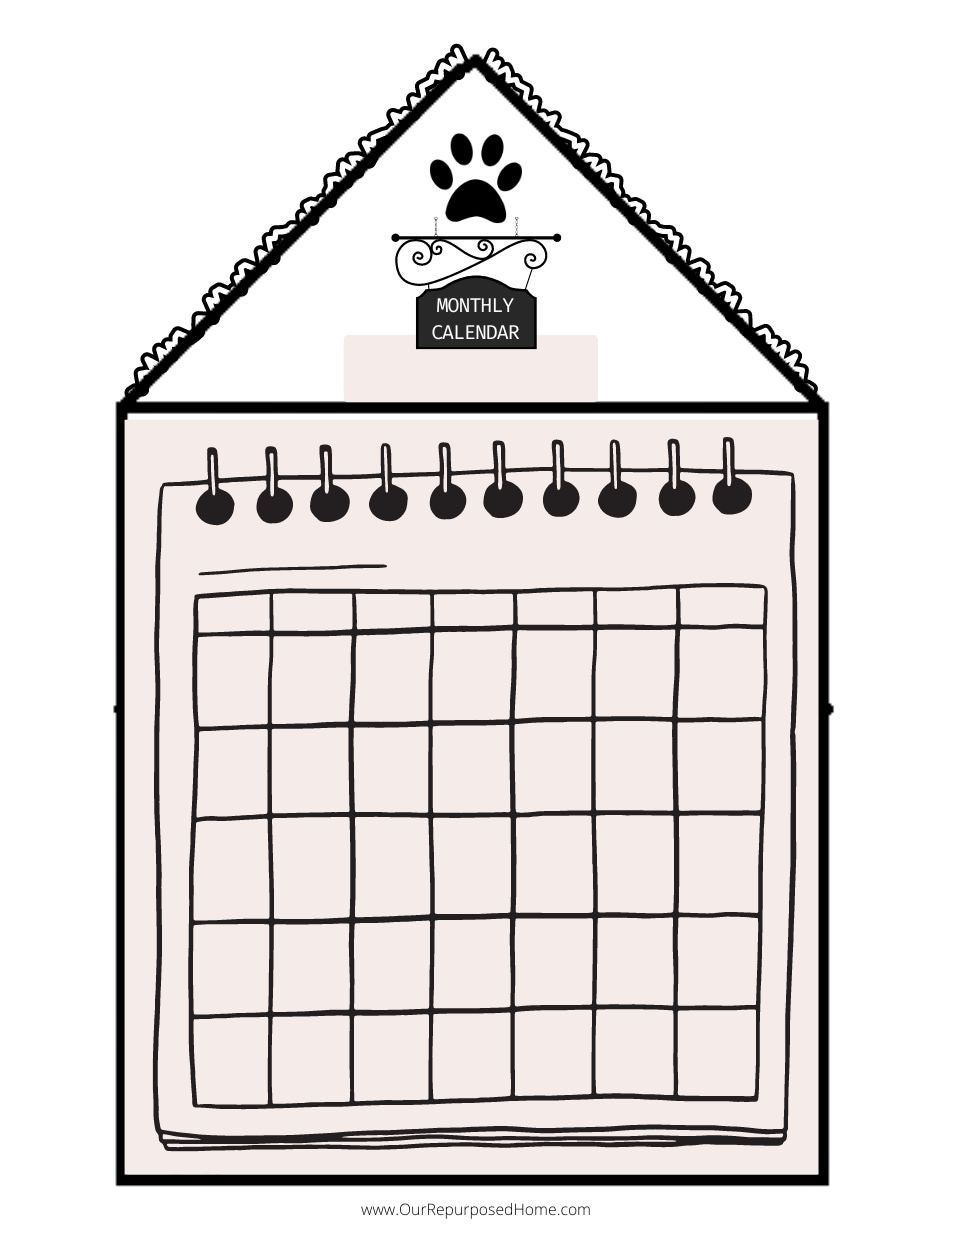 CATIO THEMED PLANNER - Payhip